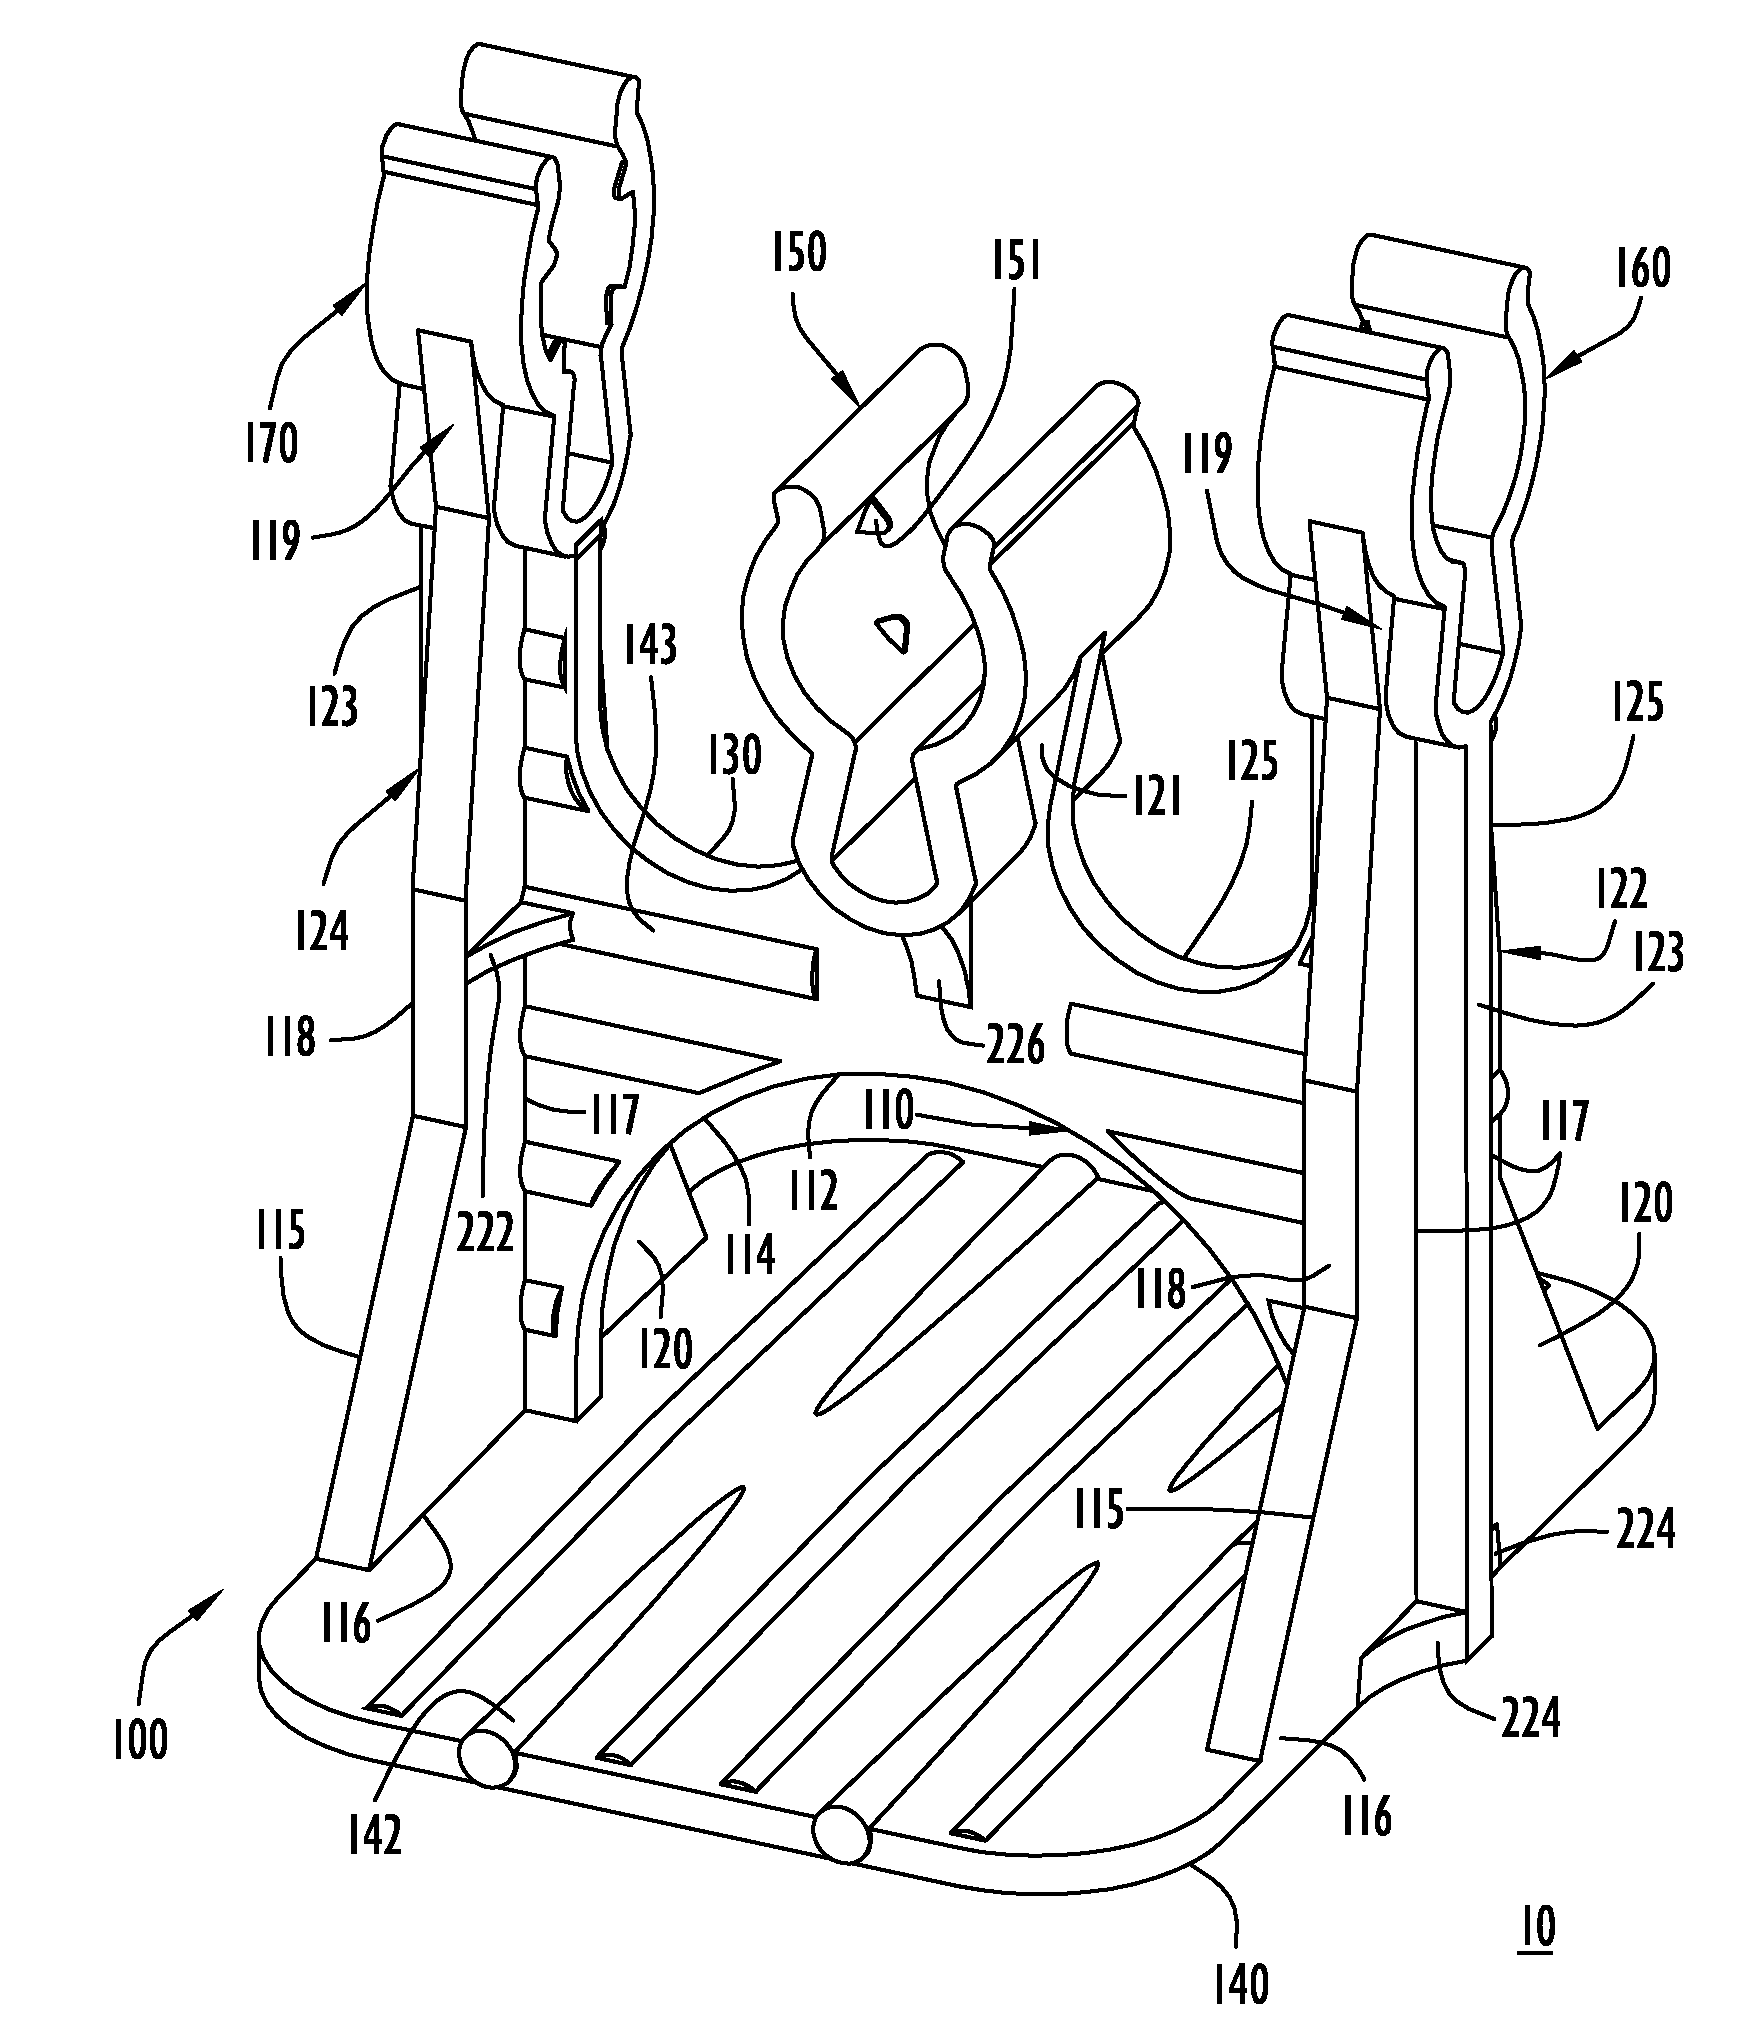 Method and apparatus for positioning reinforcing members within hardened material structures